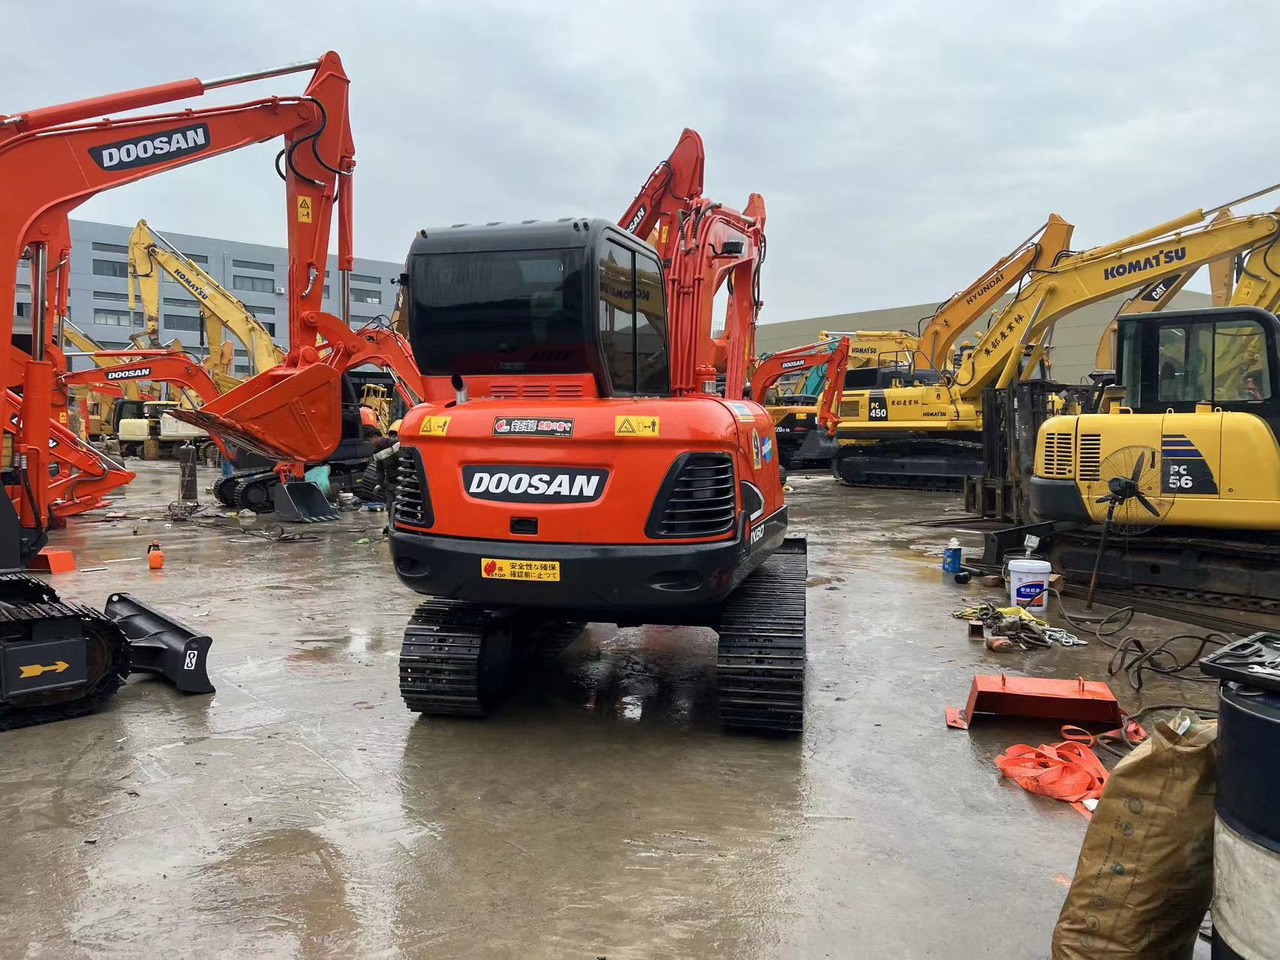 Pelle sur chenille High quality DOOSAN used excavator DX60 strong power hot selling !!!: photos 8